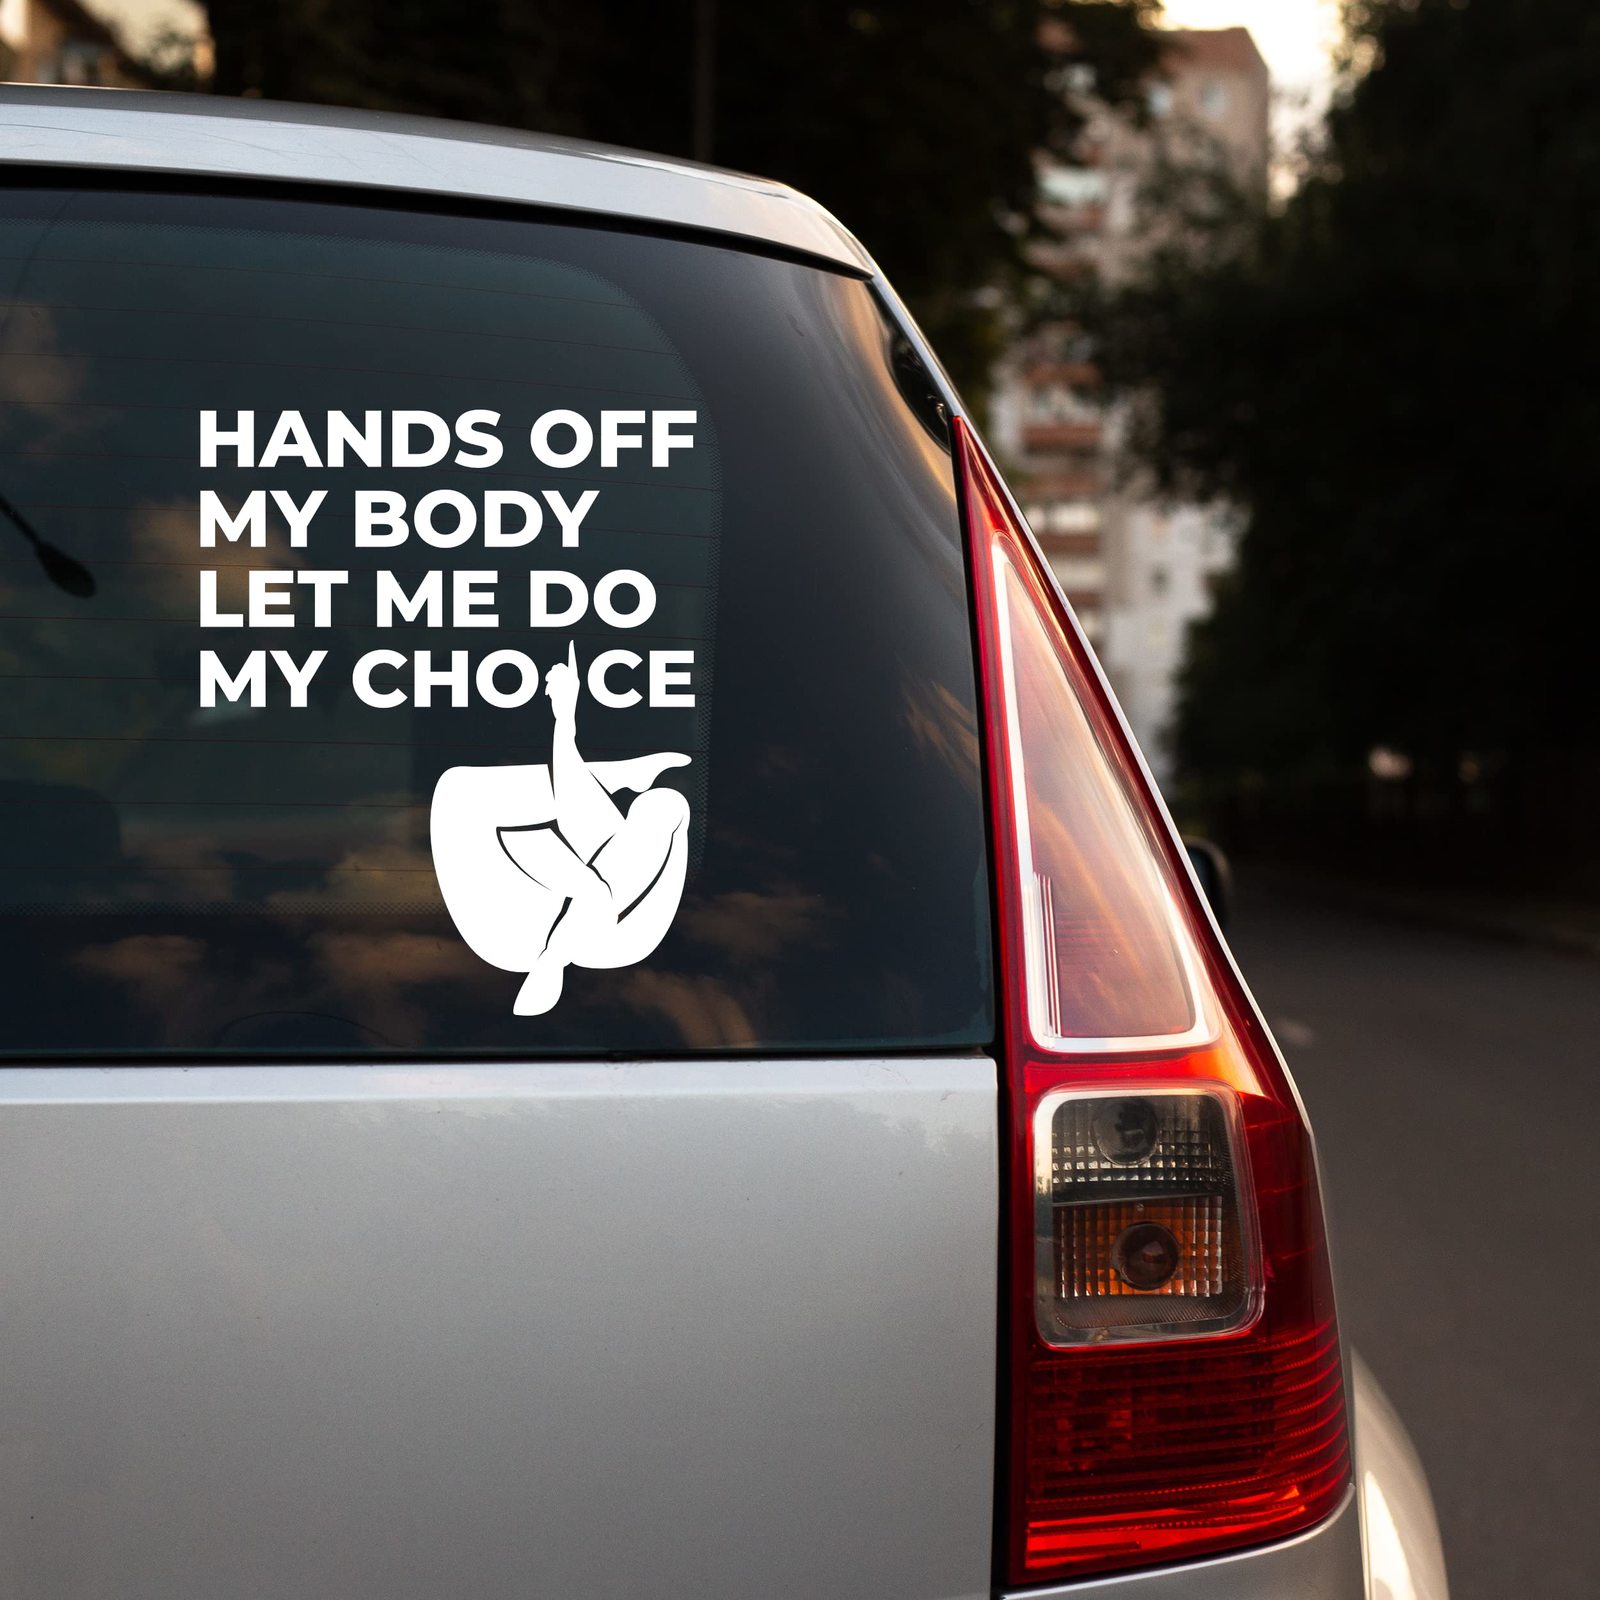 Primary image for Hands Off My Body Let Me Do My Choice Sticker with Slogan of Women's Rights Femi